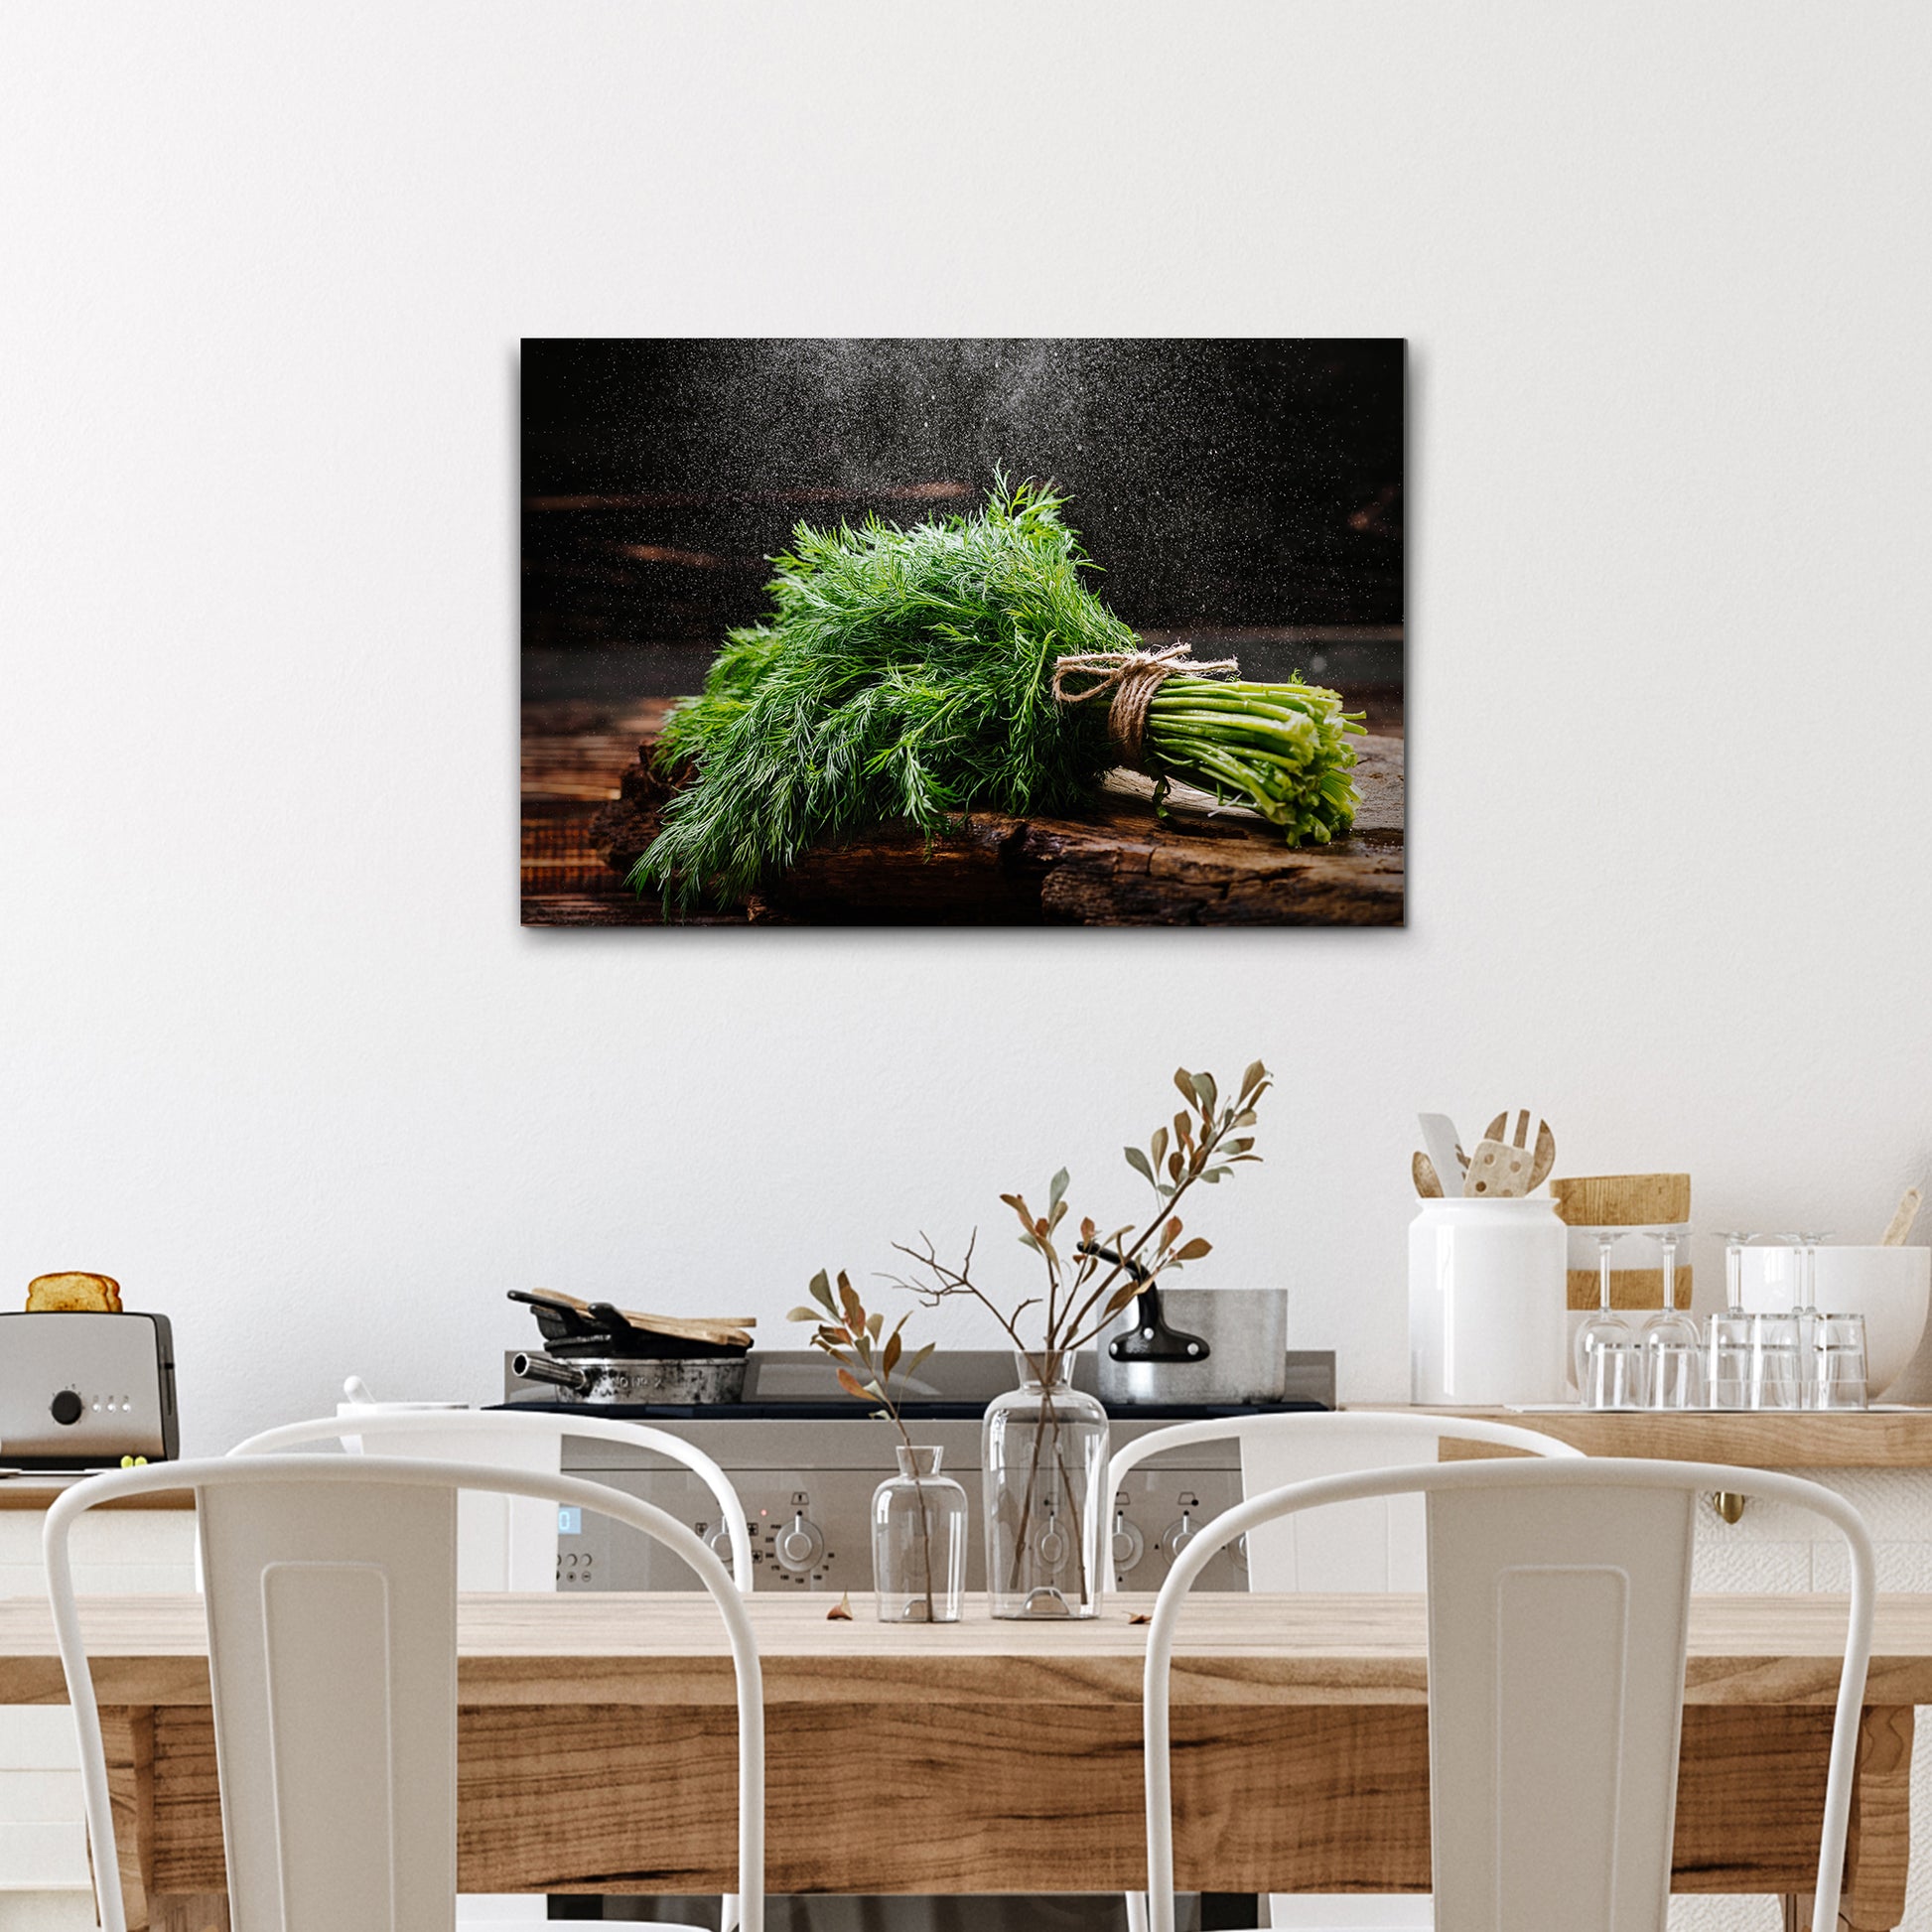 Plant Herb Fresh Dill Bunch Canvas Wall Art - Image by Tailored Canvases